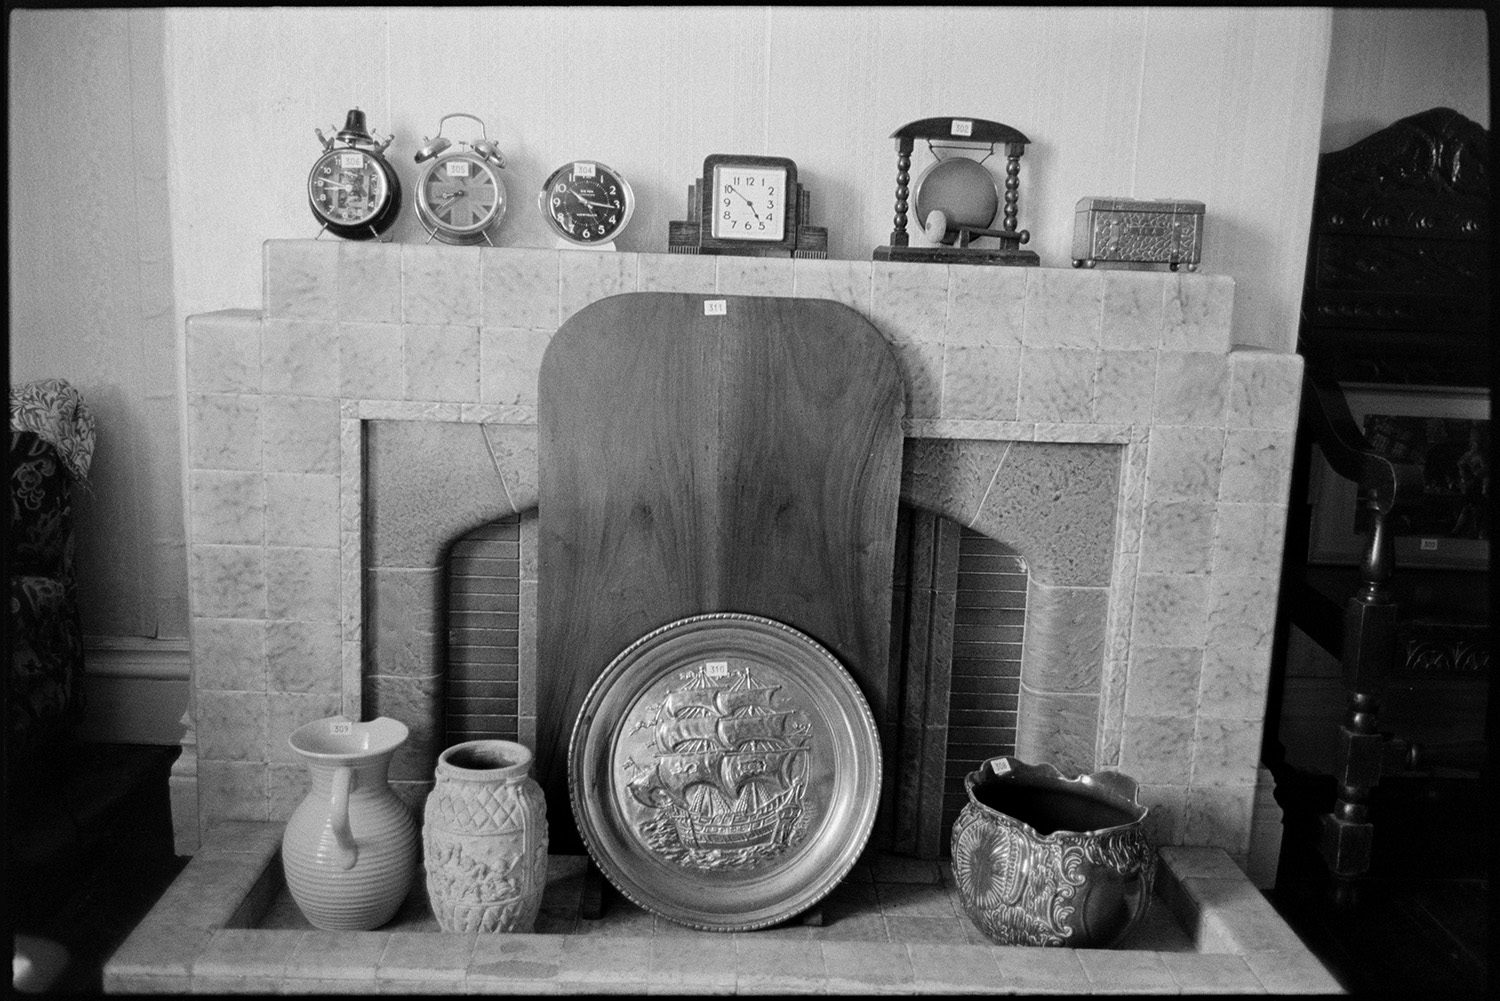 China, clocks and ornaments on viewing day, before house sale fireplace, painting. 
[ A close up view of jugs, clocks, a gong and a metal platter with a ship design displayed by a fireplace at Arscotts House, Dolton, on the viewing day before the contents of the house are sold.]